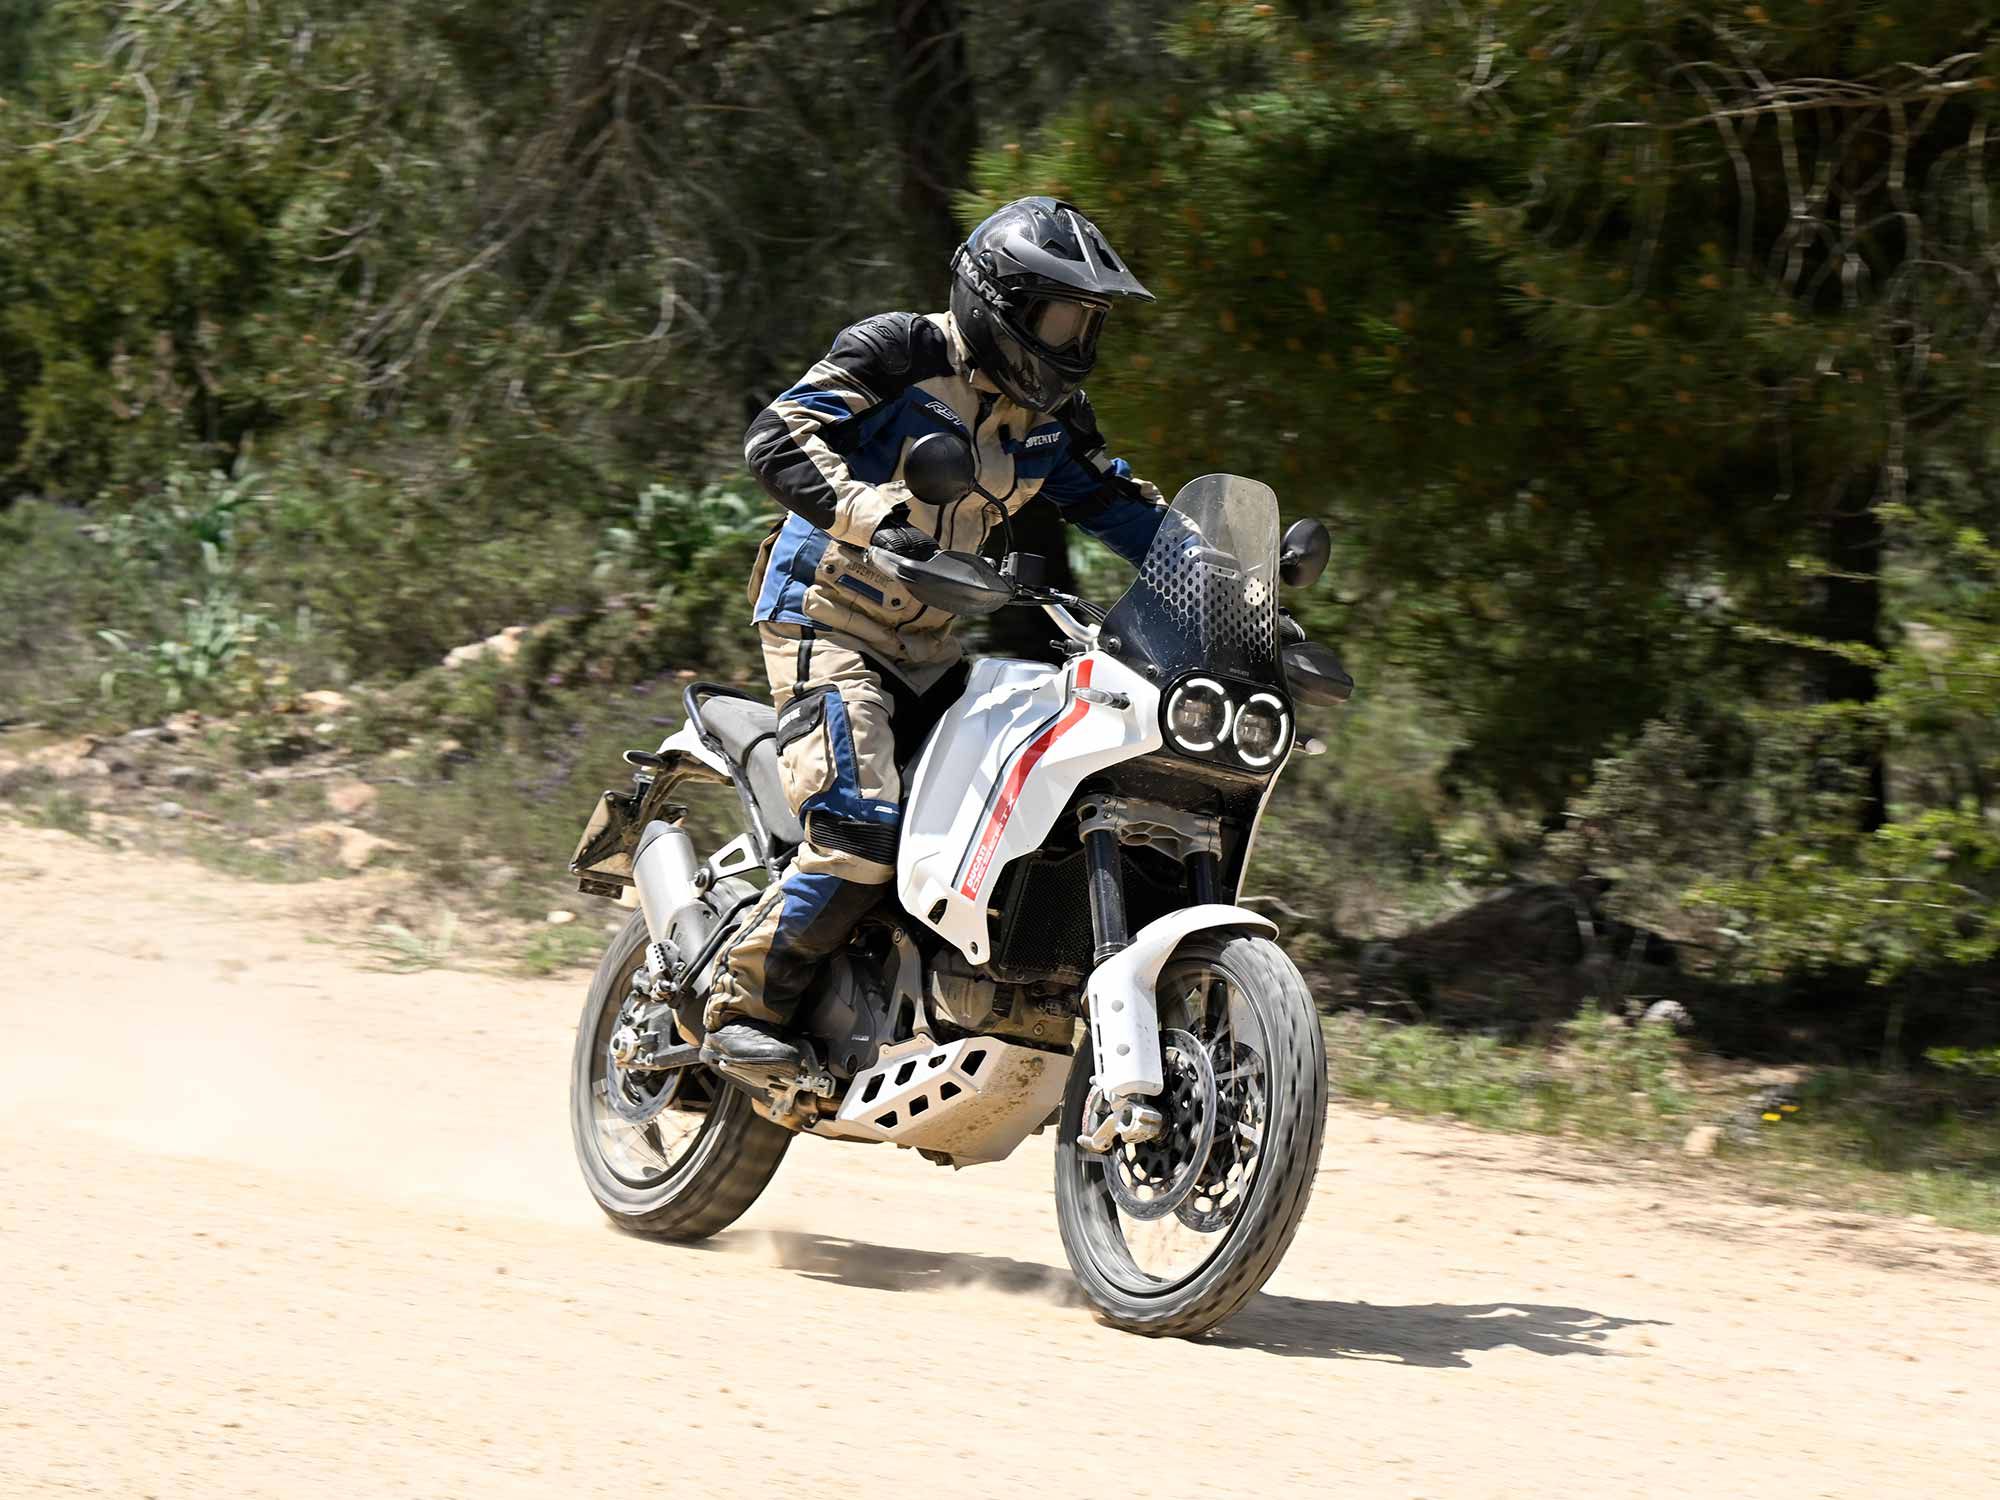 The X has been designed to work both on and off-road, while being fundamentally easy to use, so it has much to prove. We flew to Sardinia, Italy, to test its credentials, both on and off-road.